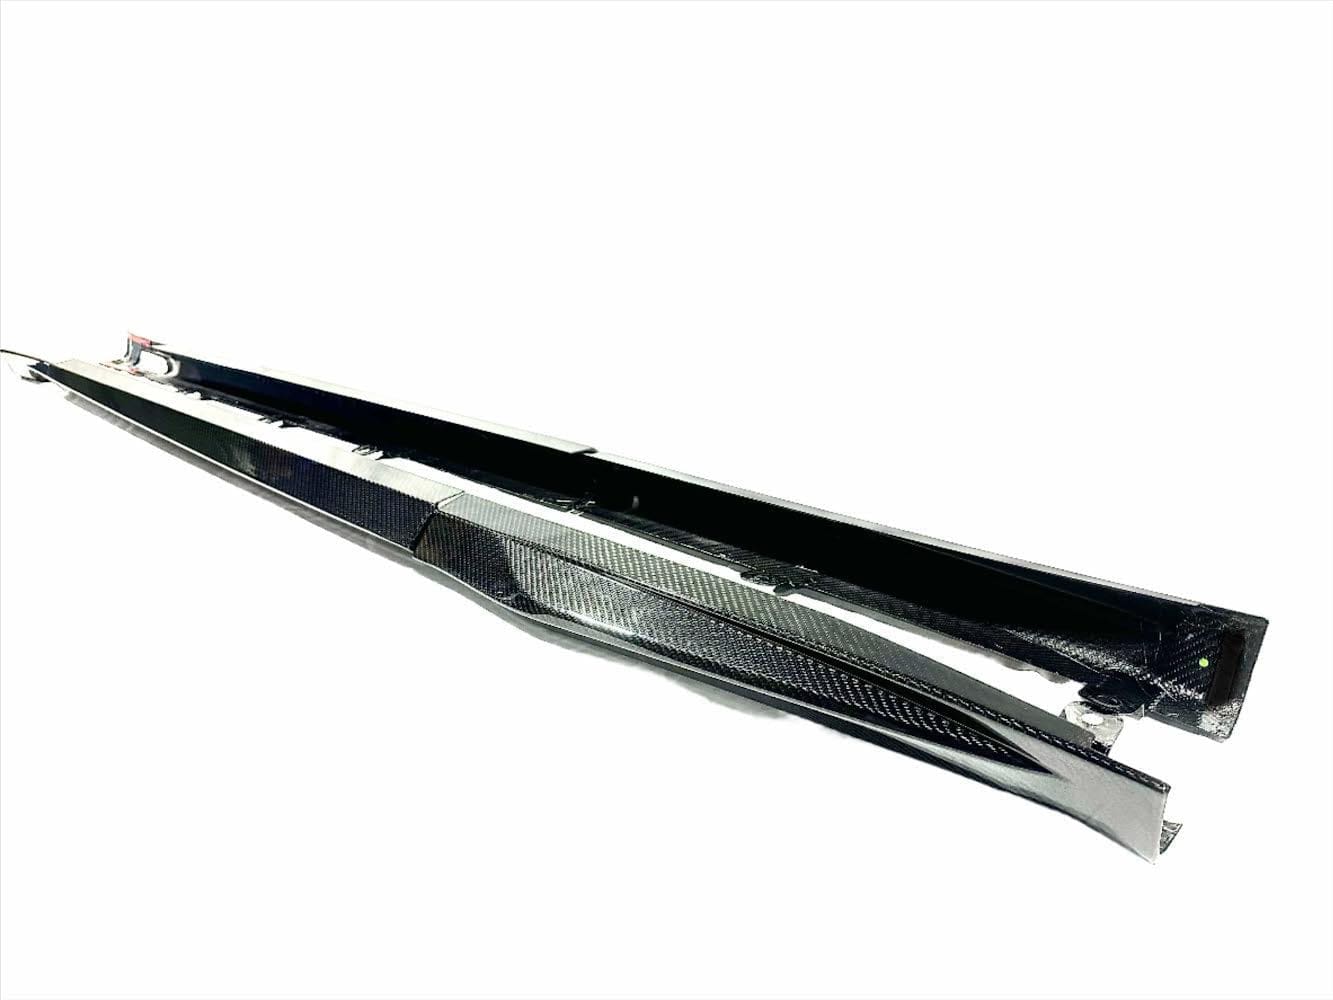 Kies-Motorsports Kies Motorsports Kies Carbon F97 X3M Dry Carbon Fiber S-Style Side Skirt Extensions